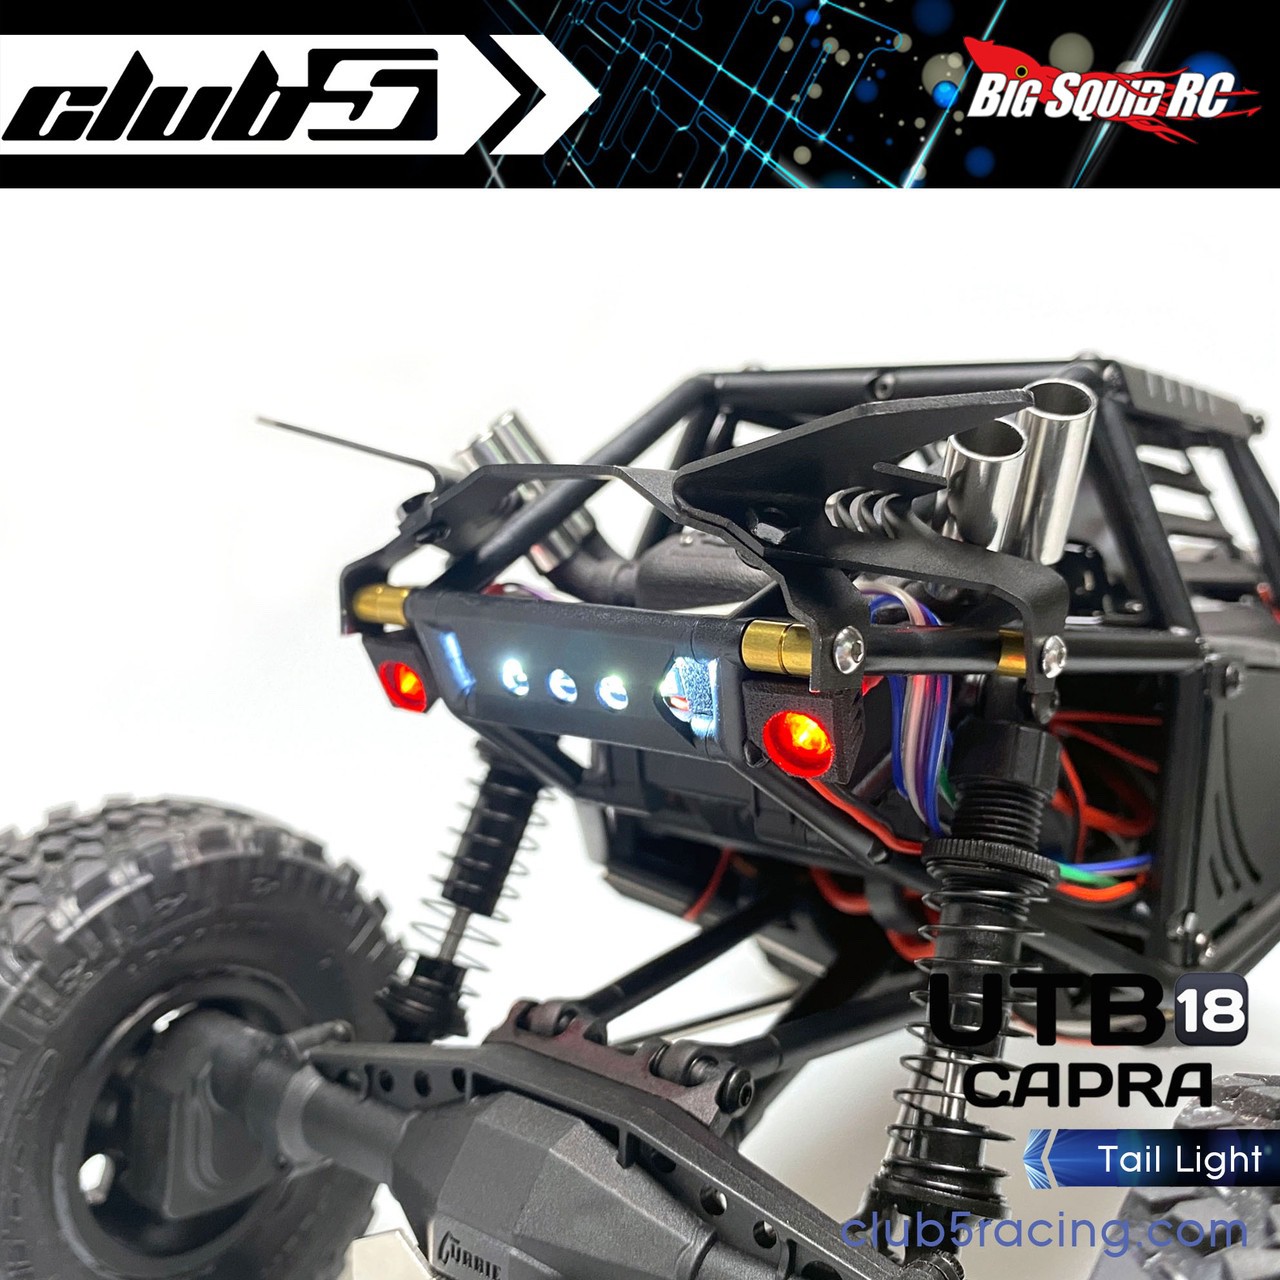 Club 5 Racing LED Taillight Kit for the Axial UTB18 Capra « Big